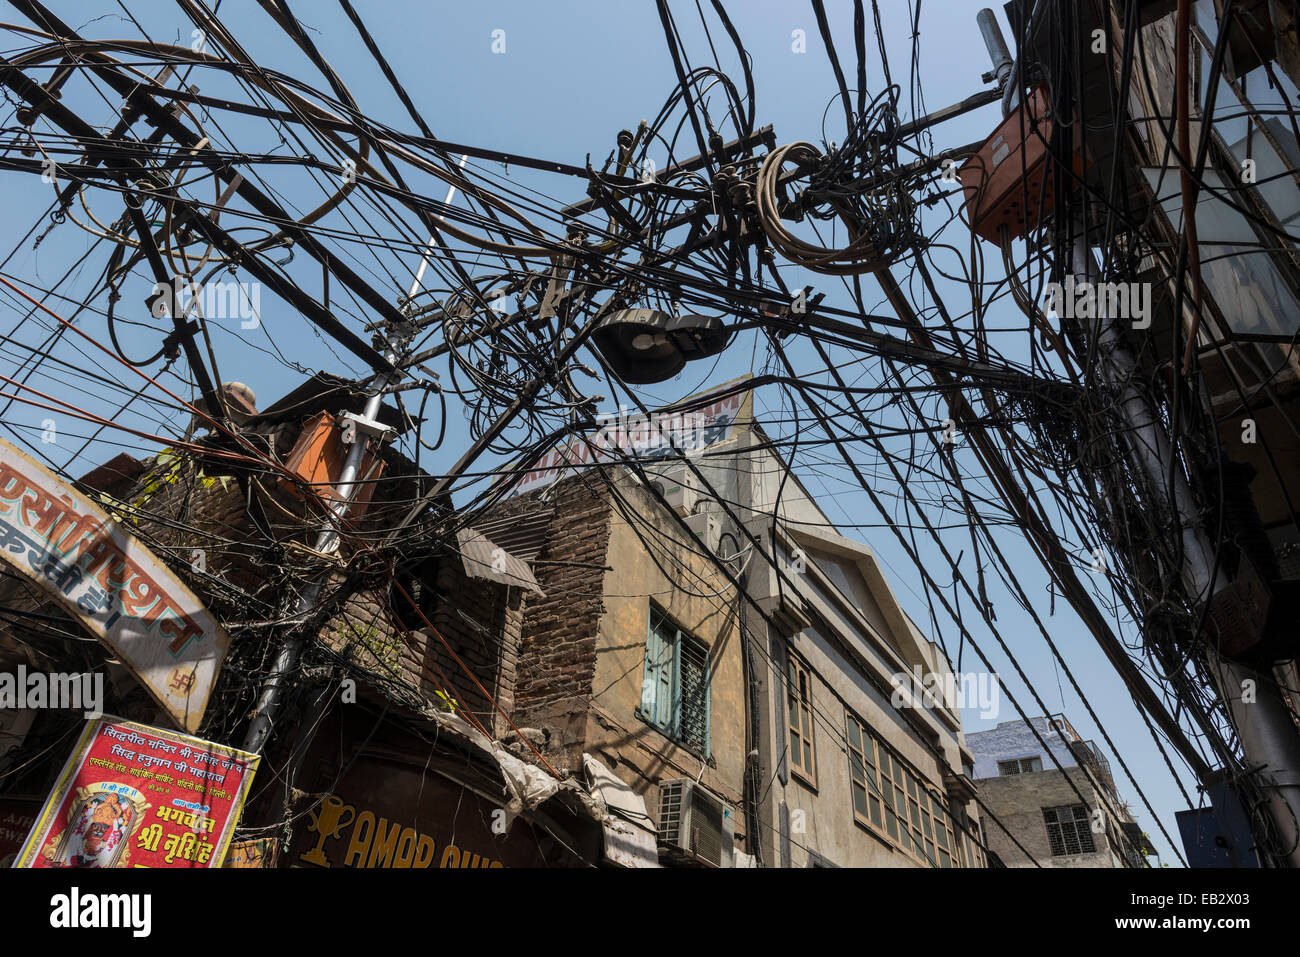 Chaotic arrangement of electricity cables in a side street, New Delhi, Delhi, India Stock Photo